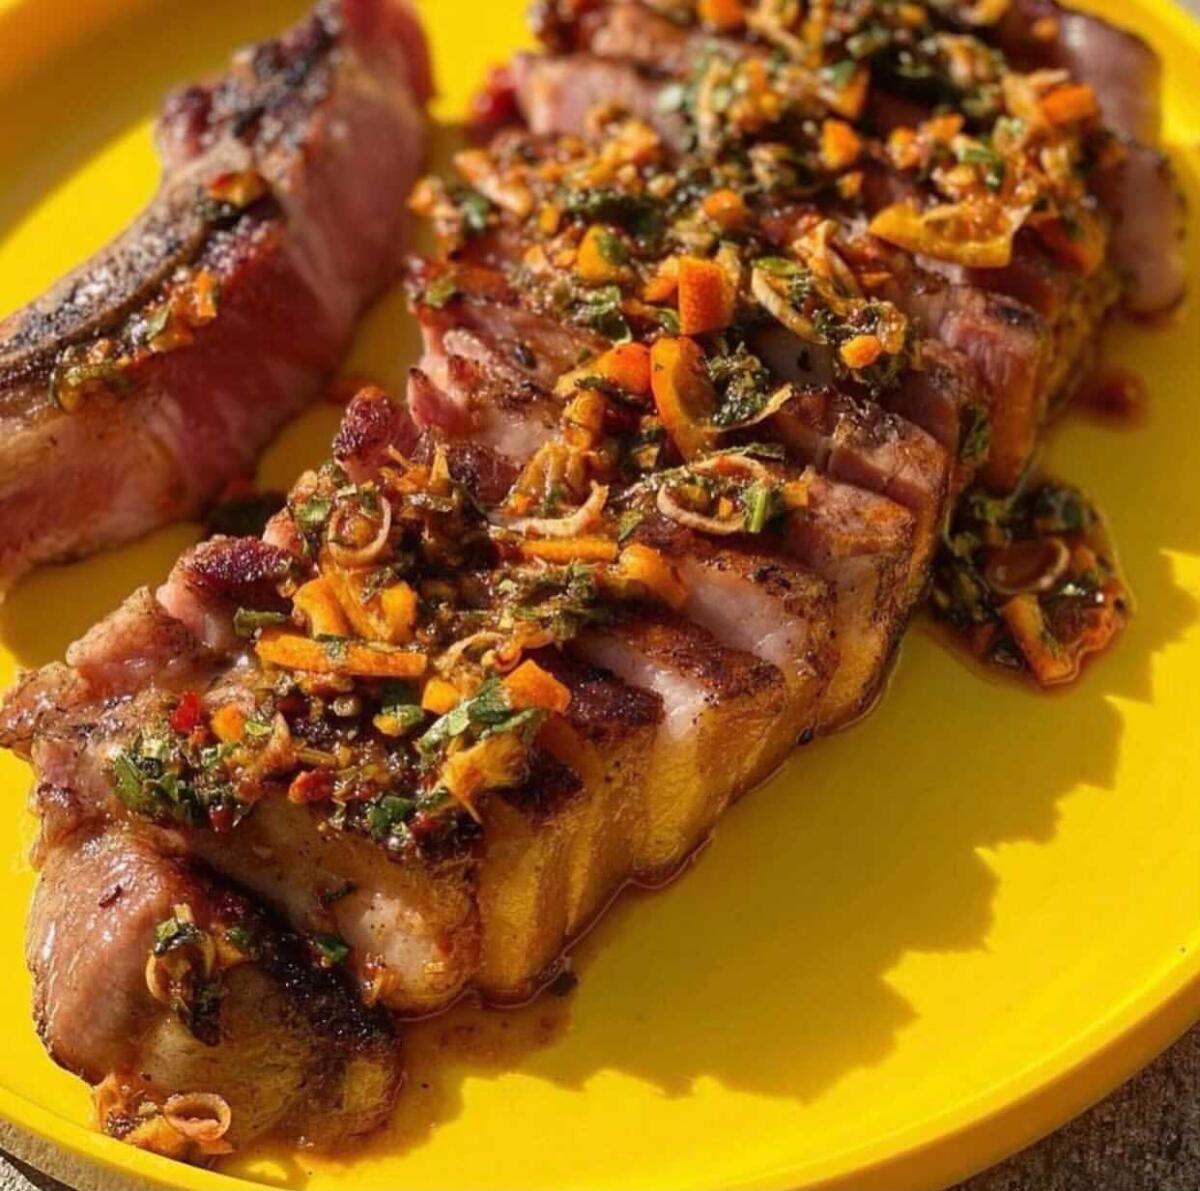 A pork chop on a yellow plate covered with a sauce with diced vegetables.